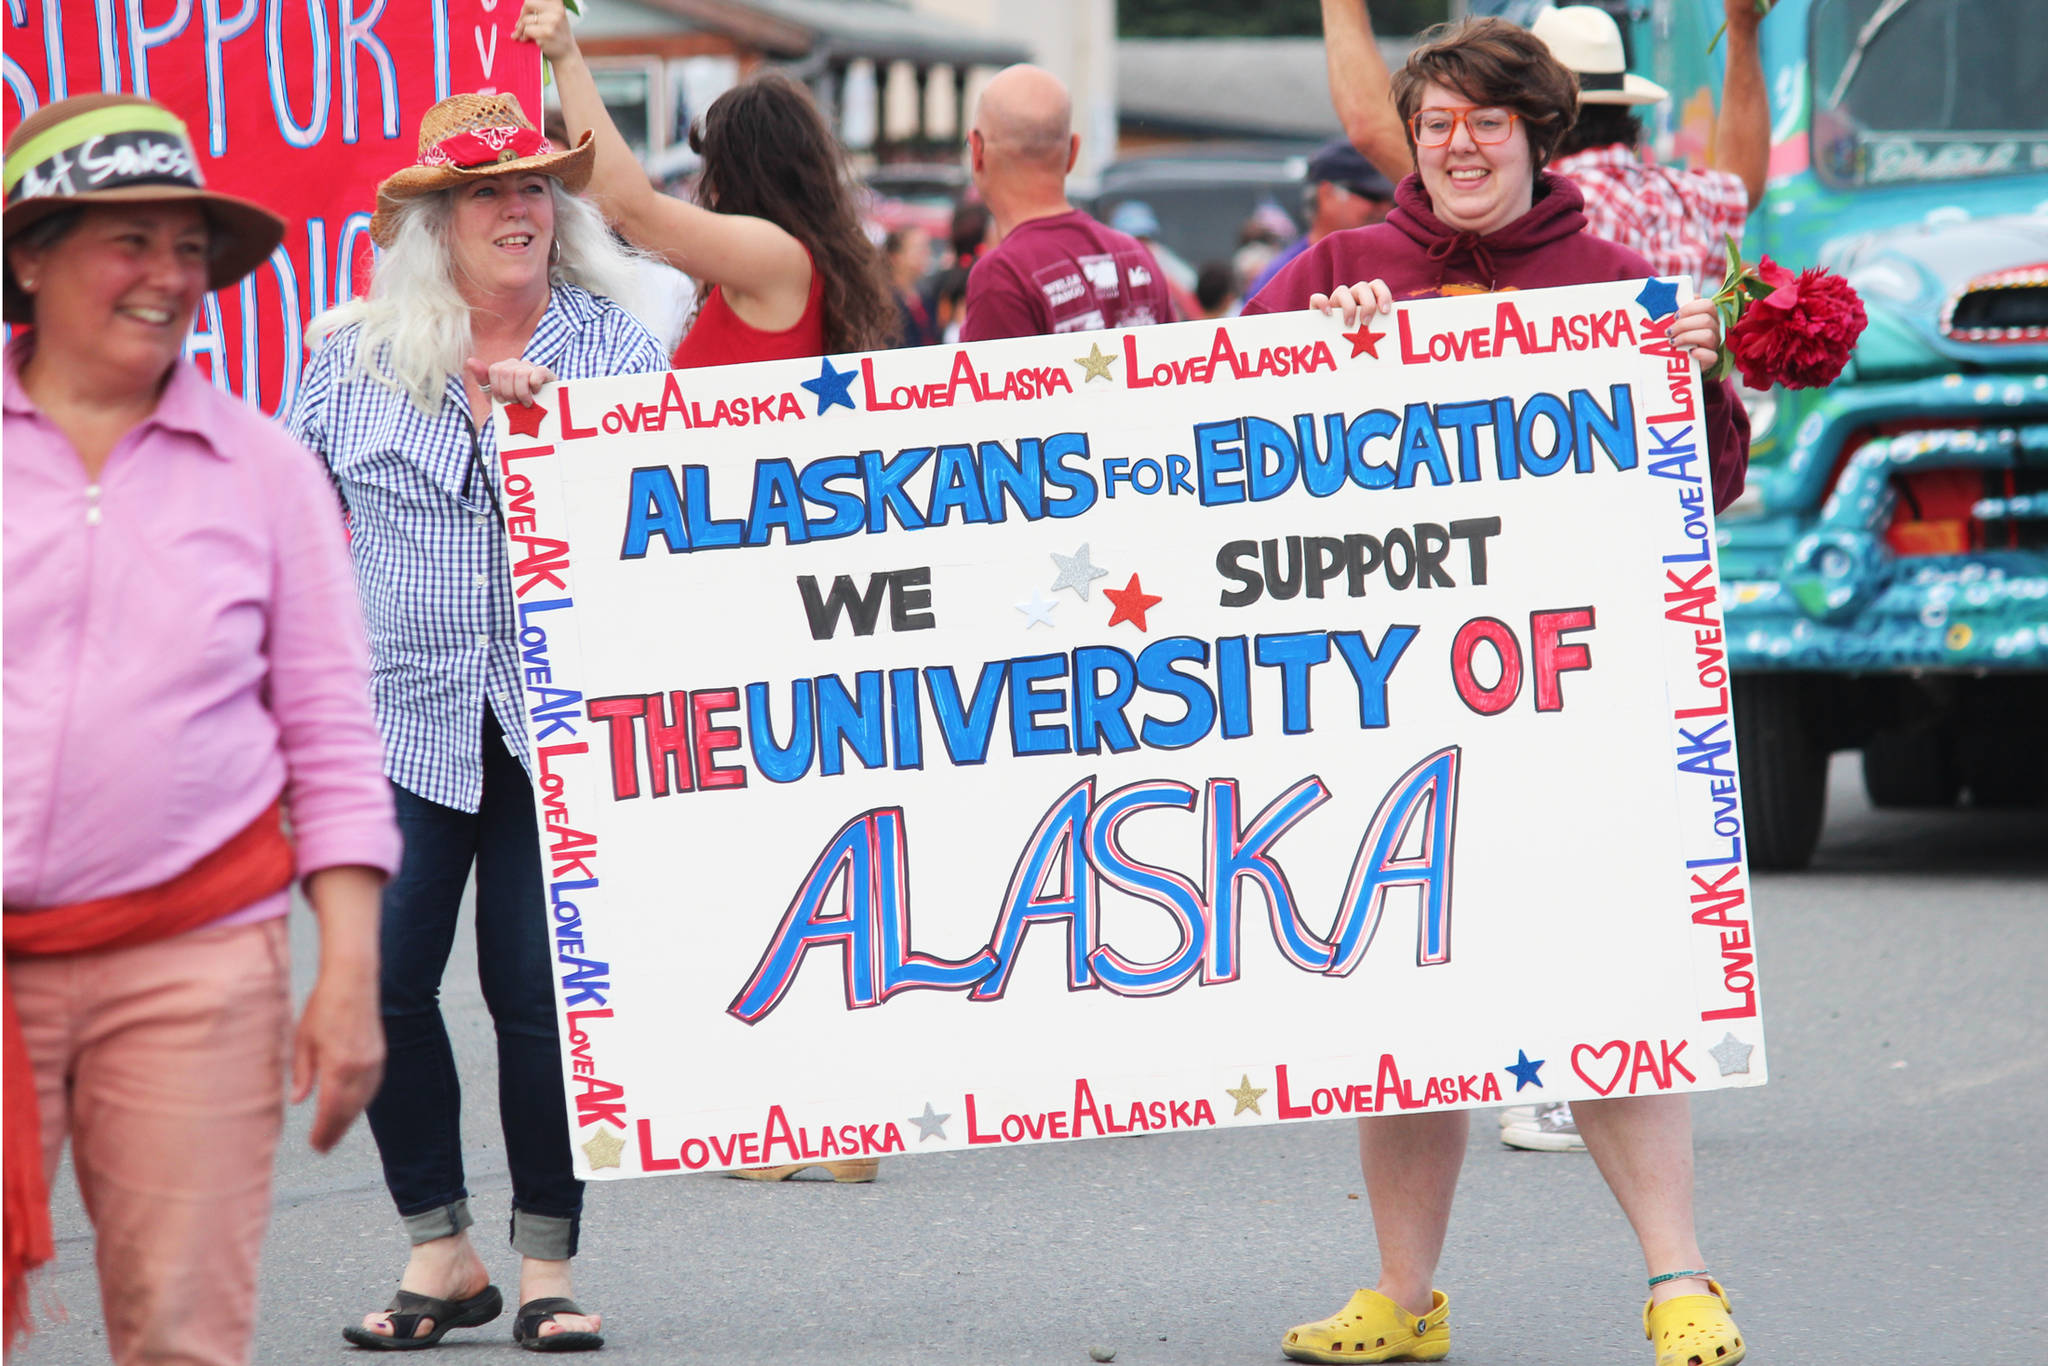 Participants in this year’s July Fourth parade hold a sign supporting the University of Alaska system while marshing down Pioneer Avenue on Thursday, July 4, 2019 in Homer, Alaska. (Photo by Megan Pacer/Homer News)